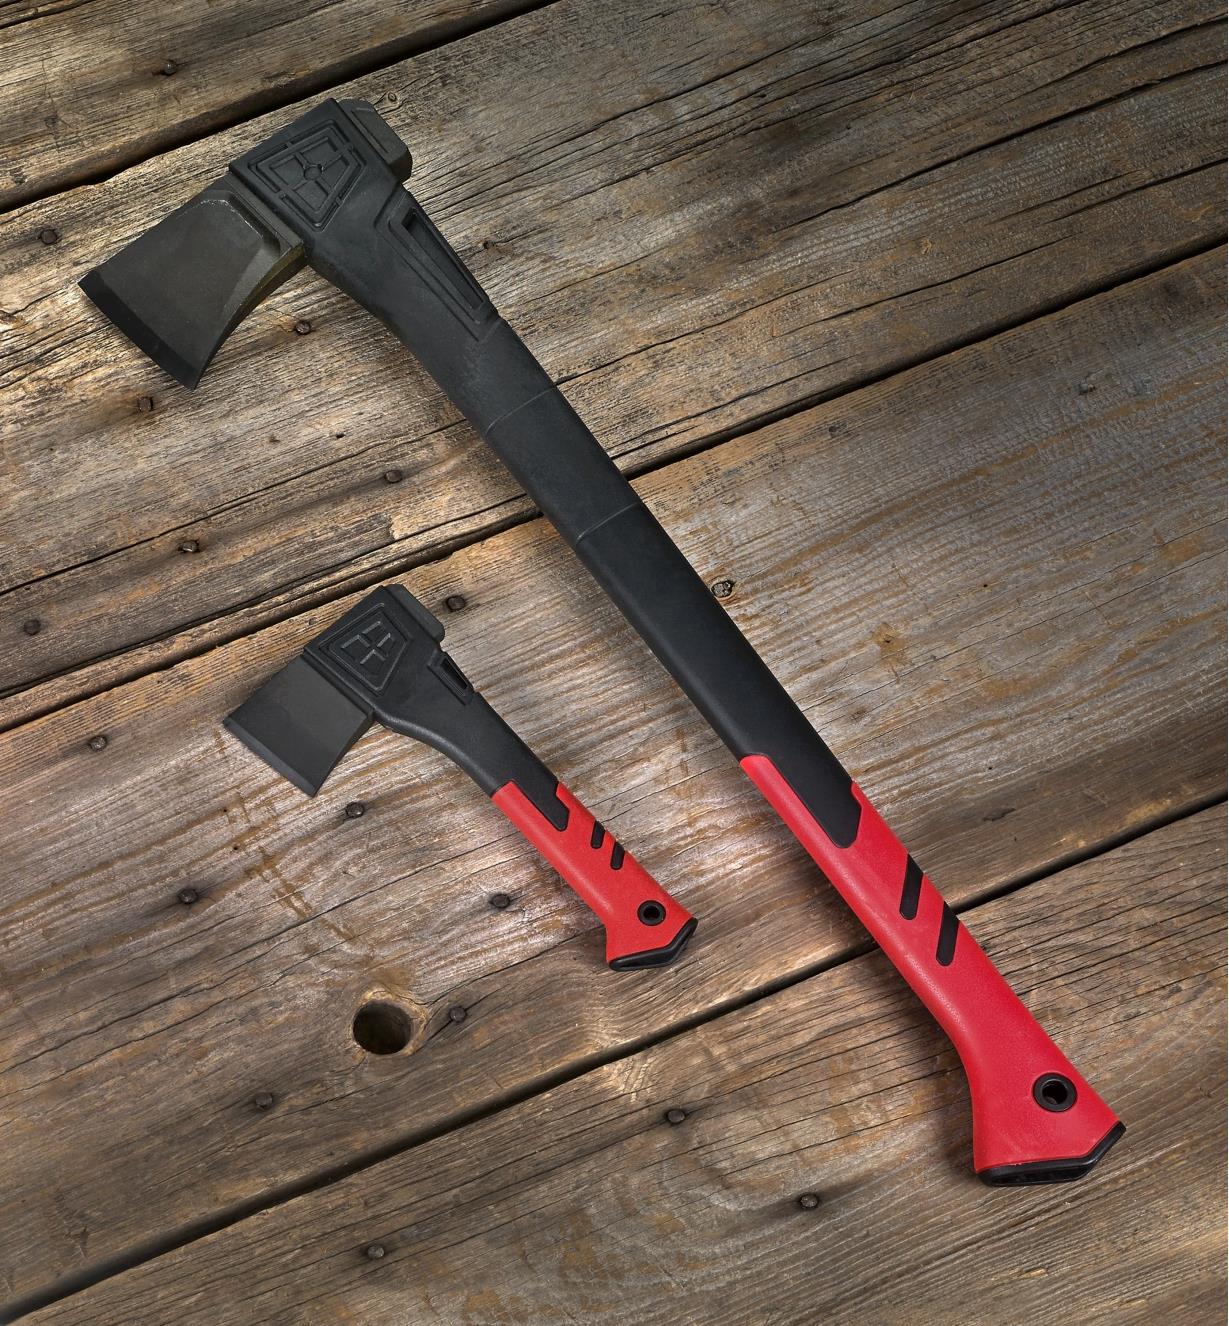 The splitting axe and the hatchet shown next to each other for scale